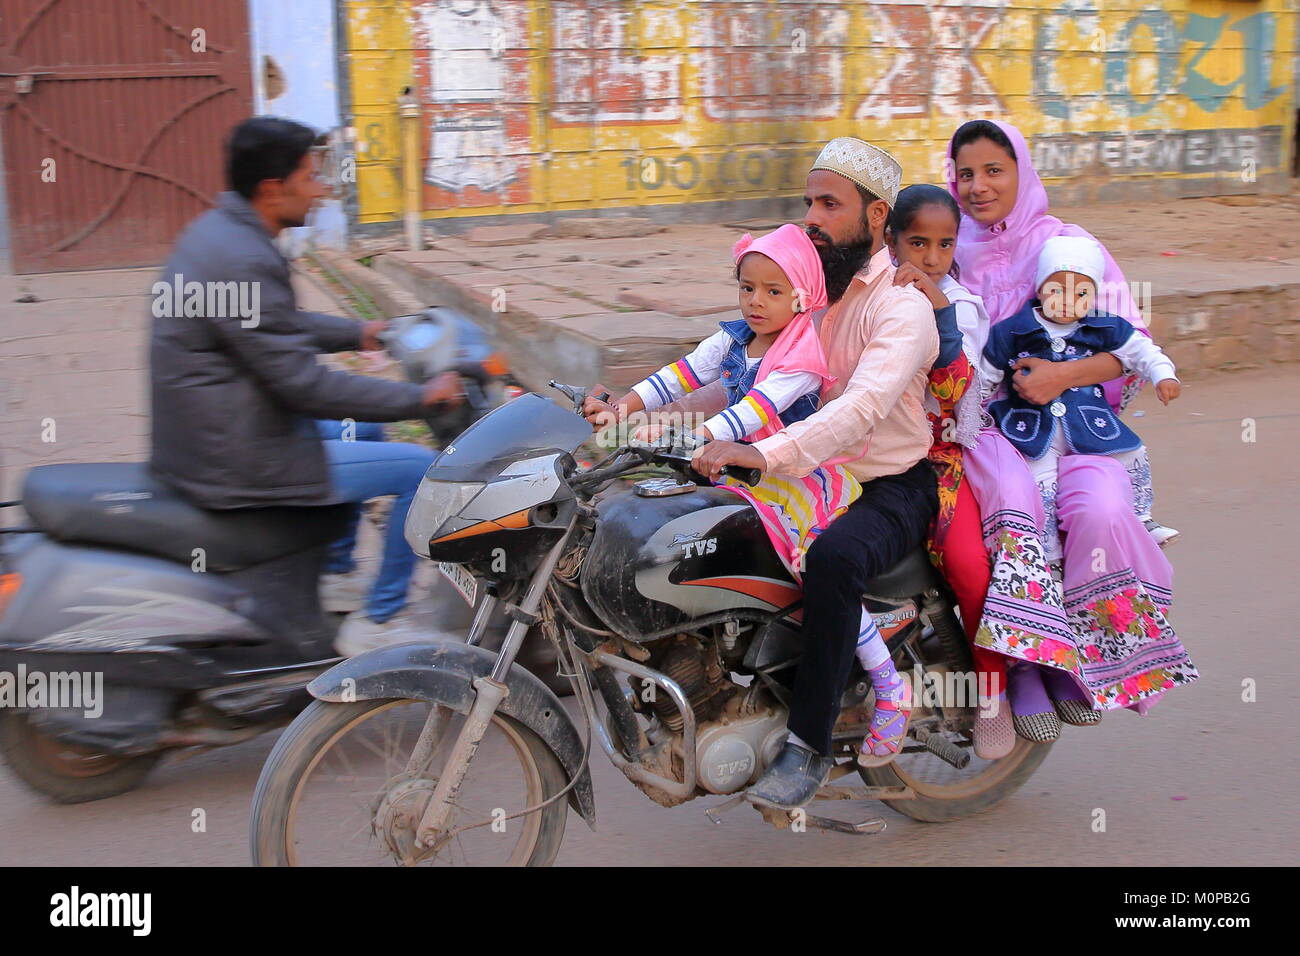 BUNDI, RAJASTHAN, INDIA - DECEMBER 10, 2017: Local transport with a smiling family travelling on a motorcycle in the streets of the old town Stock Photo